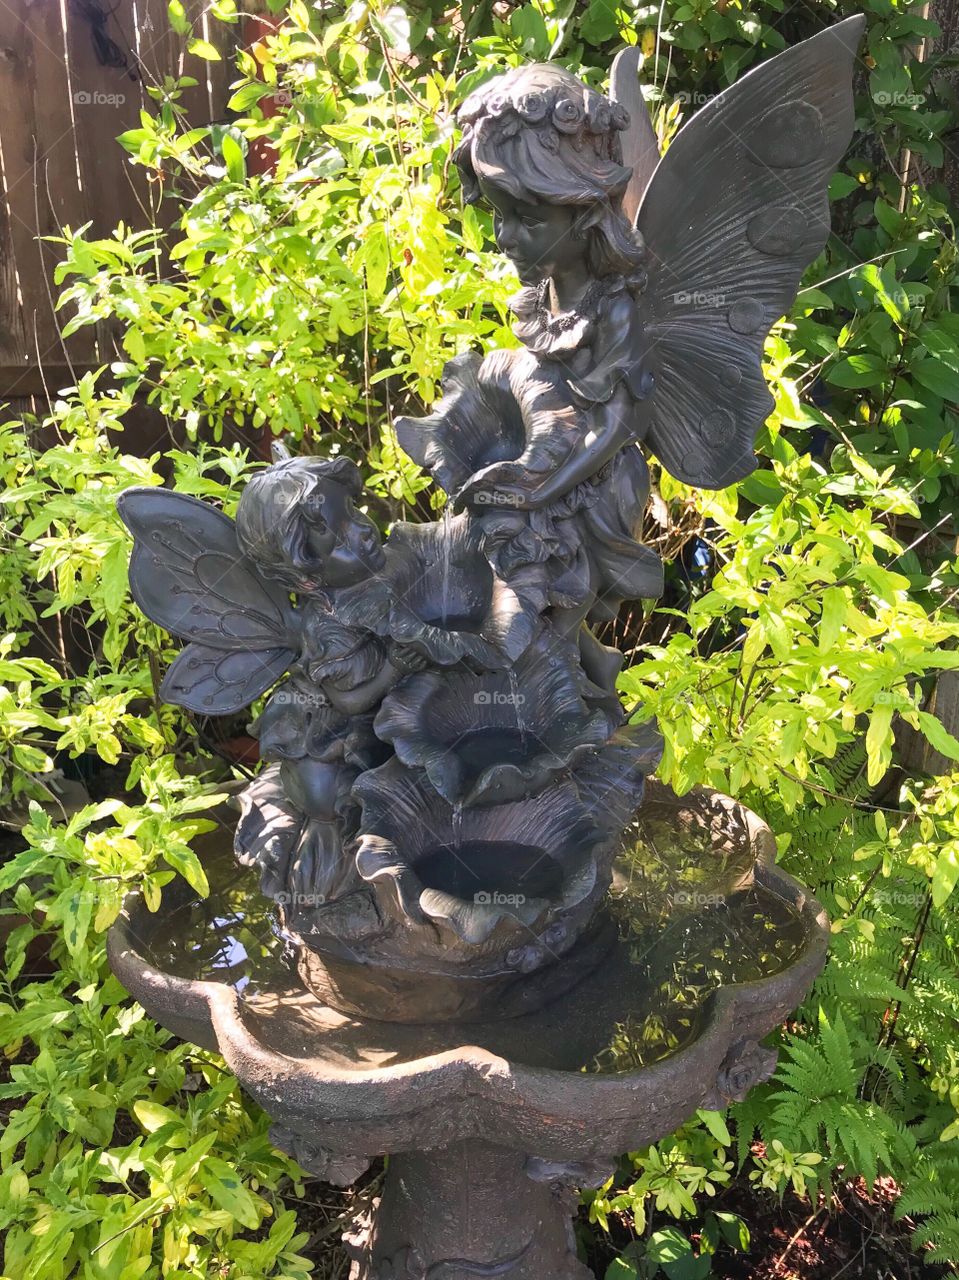 “Garden Fairies” Morning sun shines on a fairy fountain nestled amongst bushes and ferns in the garden.